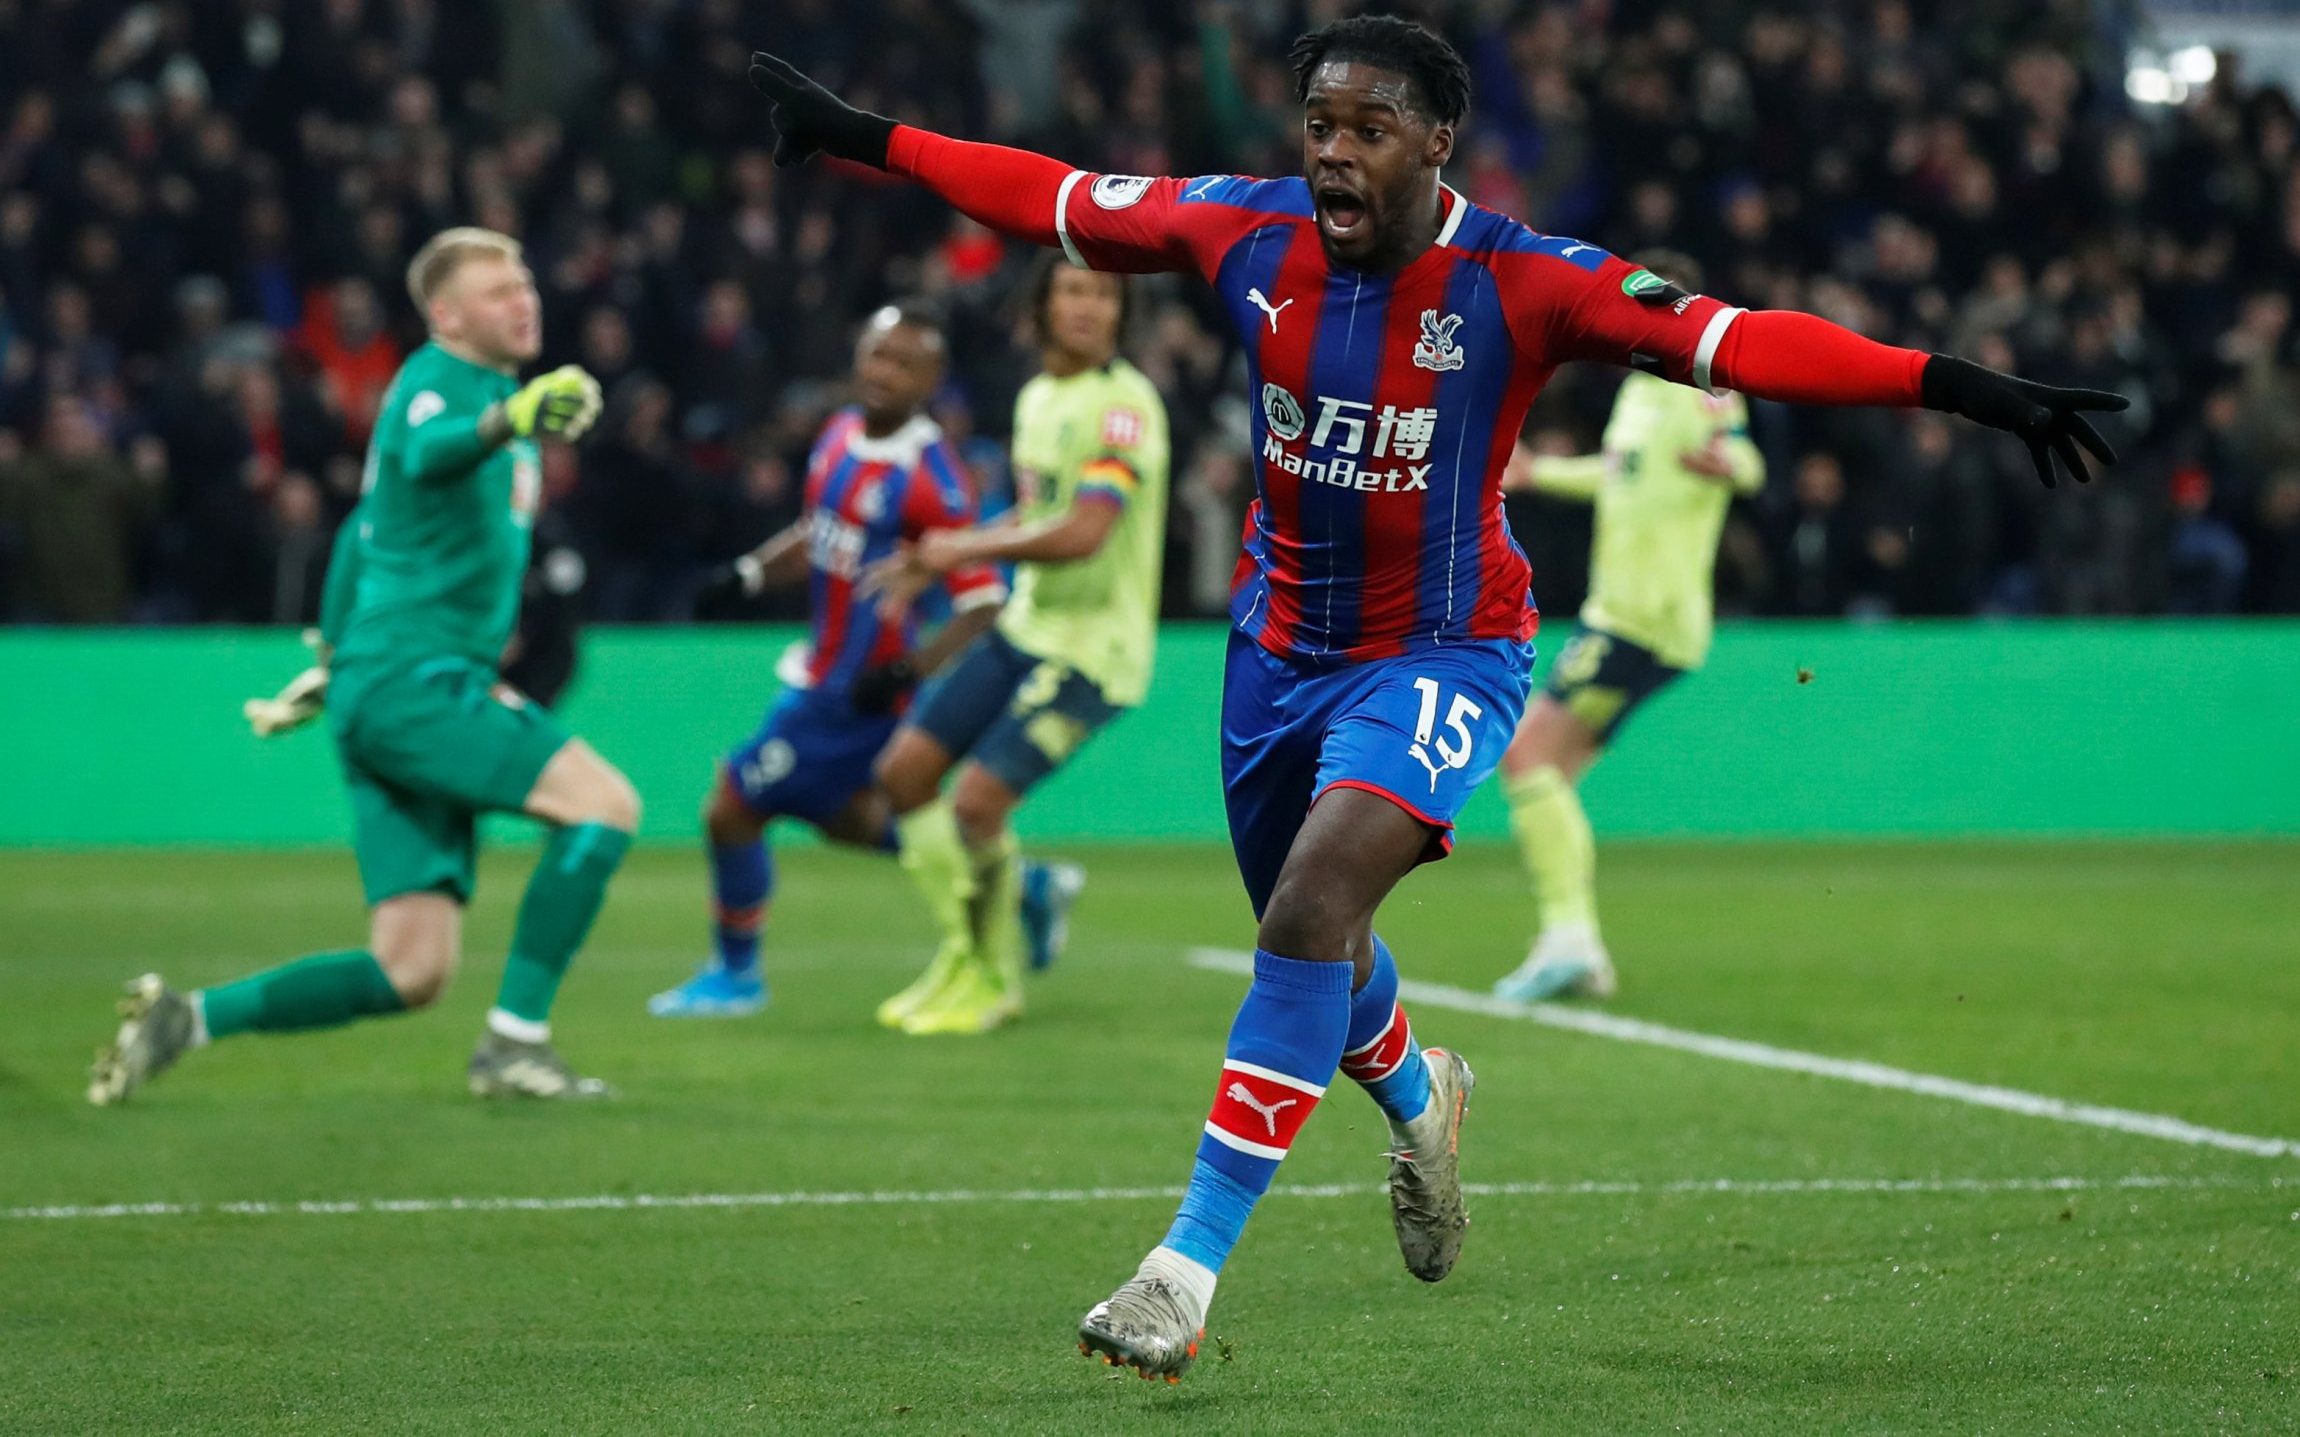 Jordan Ayew And Jeffery Schlupp In Contention For Crystal Palace Goal Of The Season